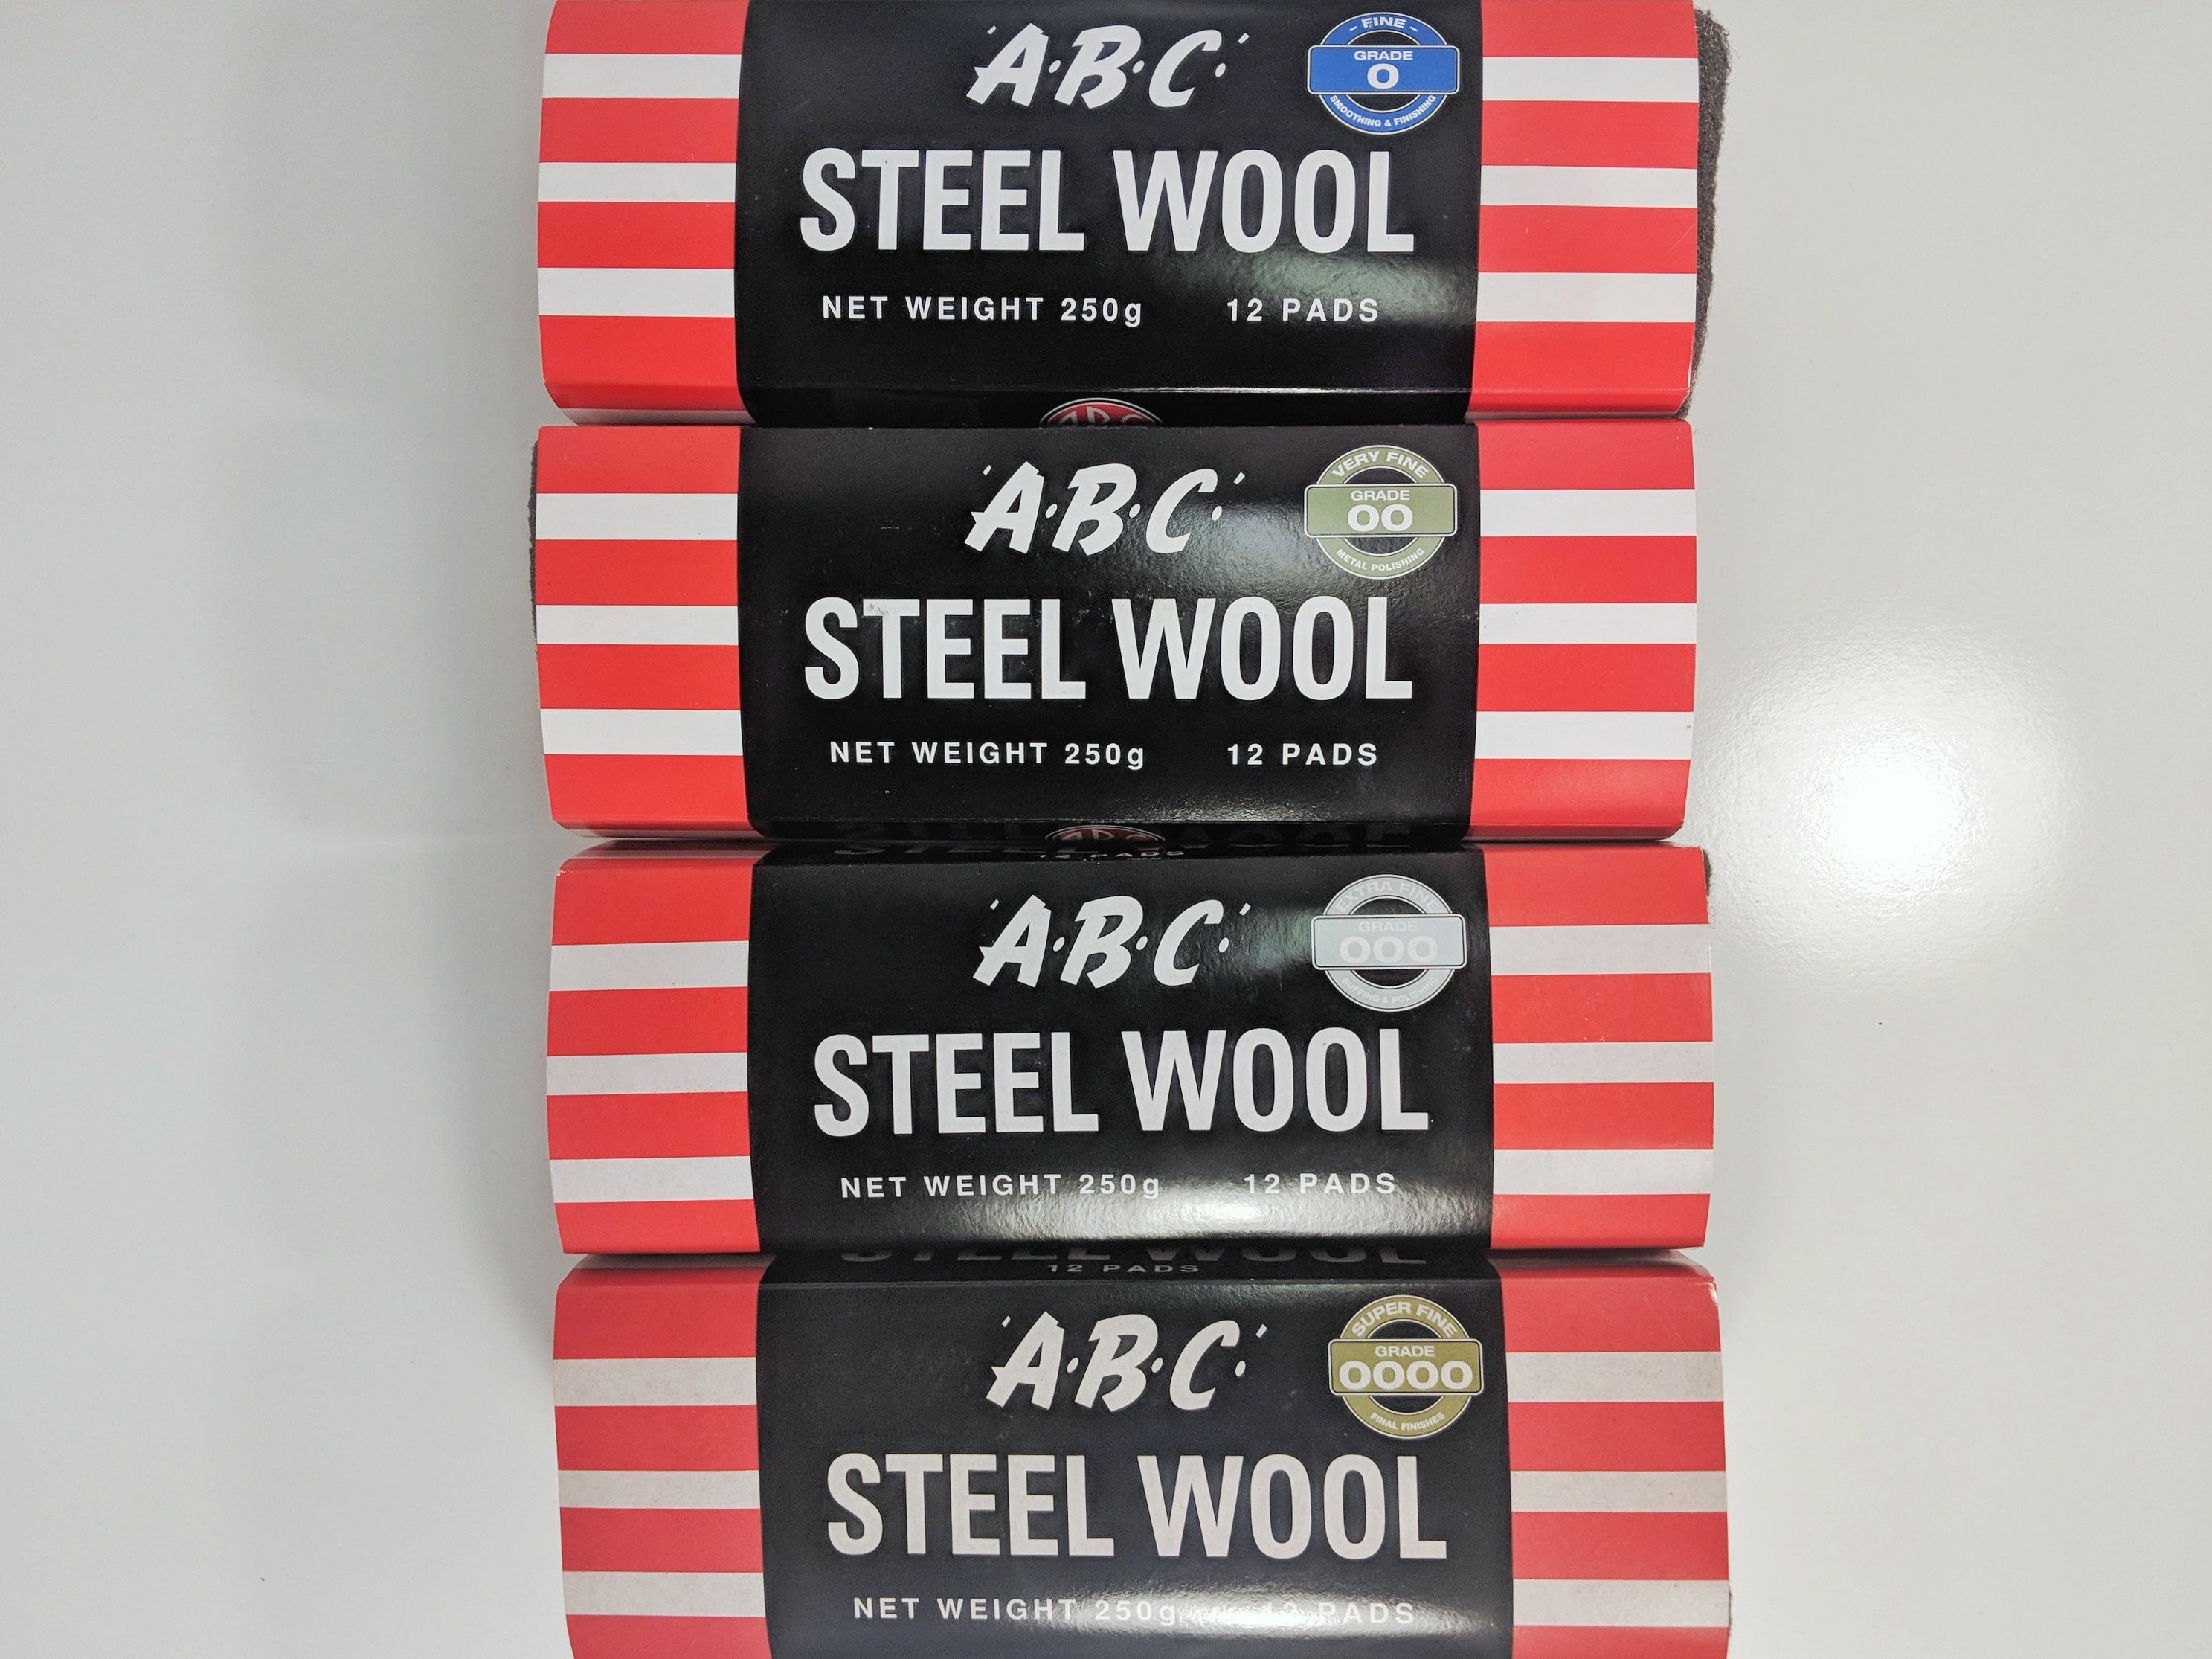 ABC Glass Rated Steel Wool 250g